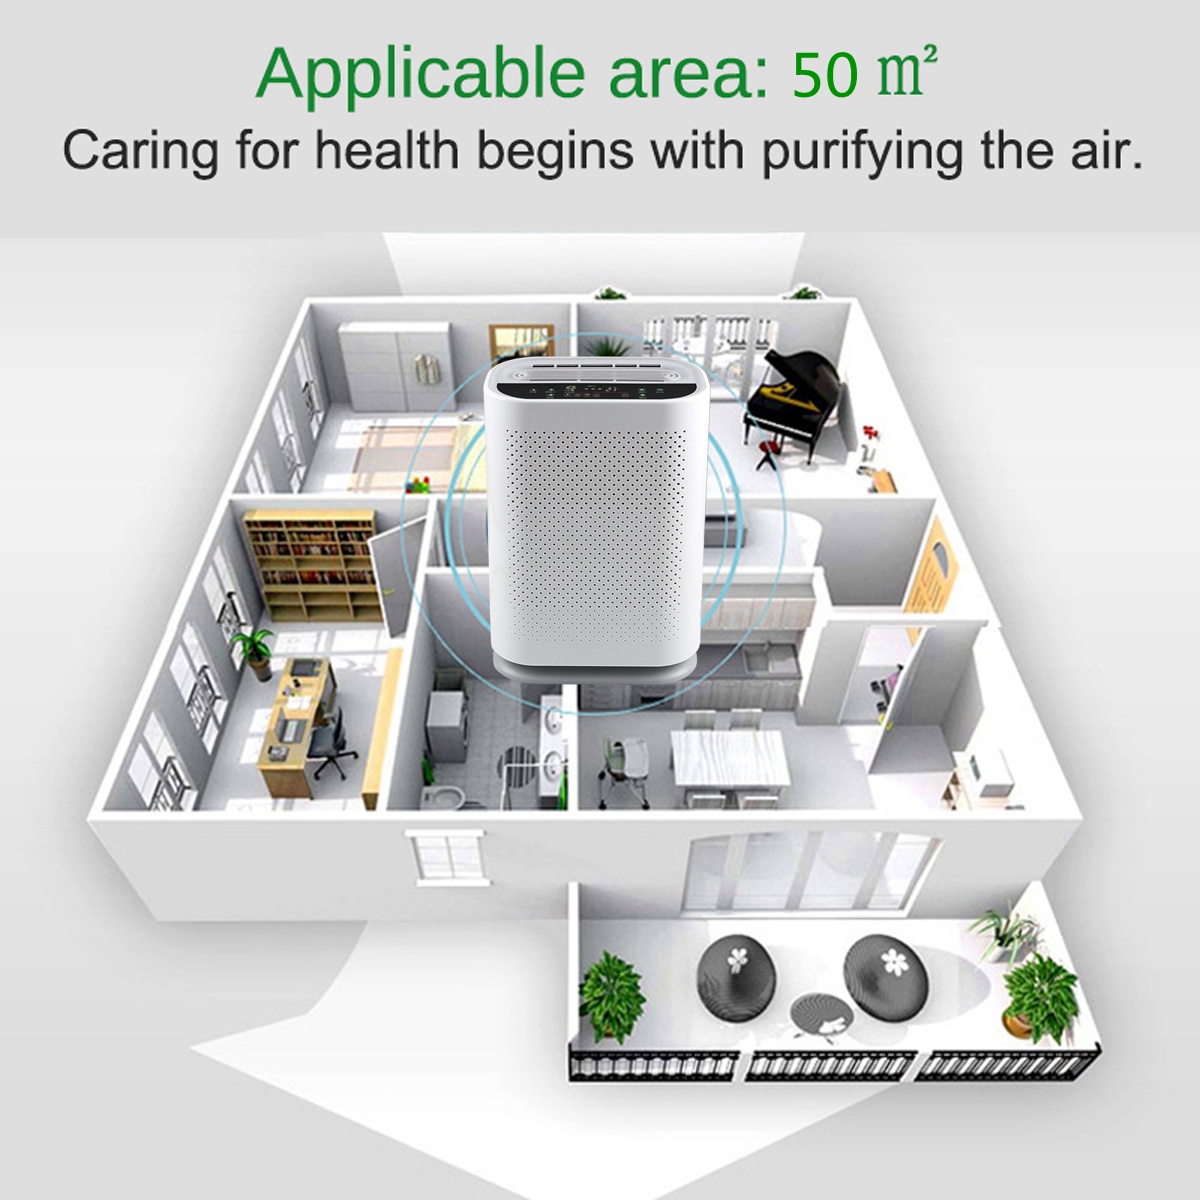 AUGIENB-Smart-Sensor-Air-Purifier-for-Home-Large-Room-With-True-HEPA-Filter-To-Remove-Smoke-Dust-Mol-1710011-3